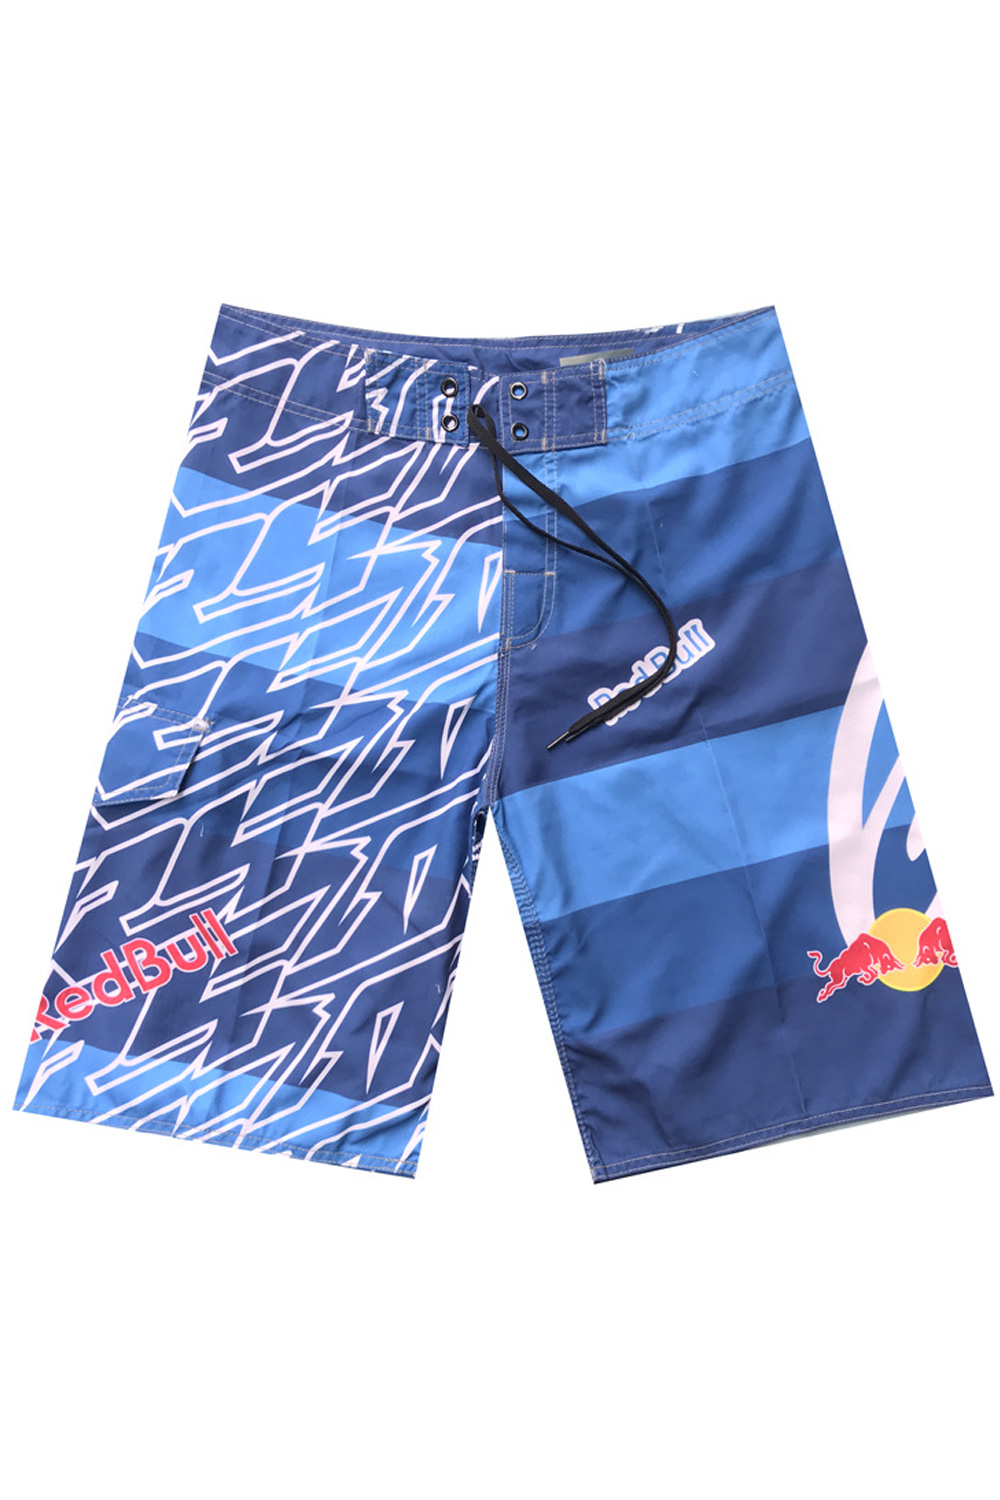 Ketty More Men Fashionable Printed Style Loose Draw cord Easy Summer Casual Swimwear Short